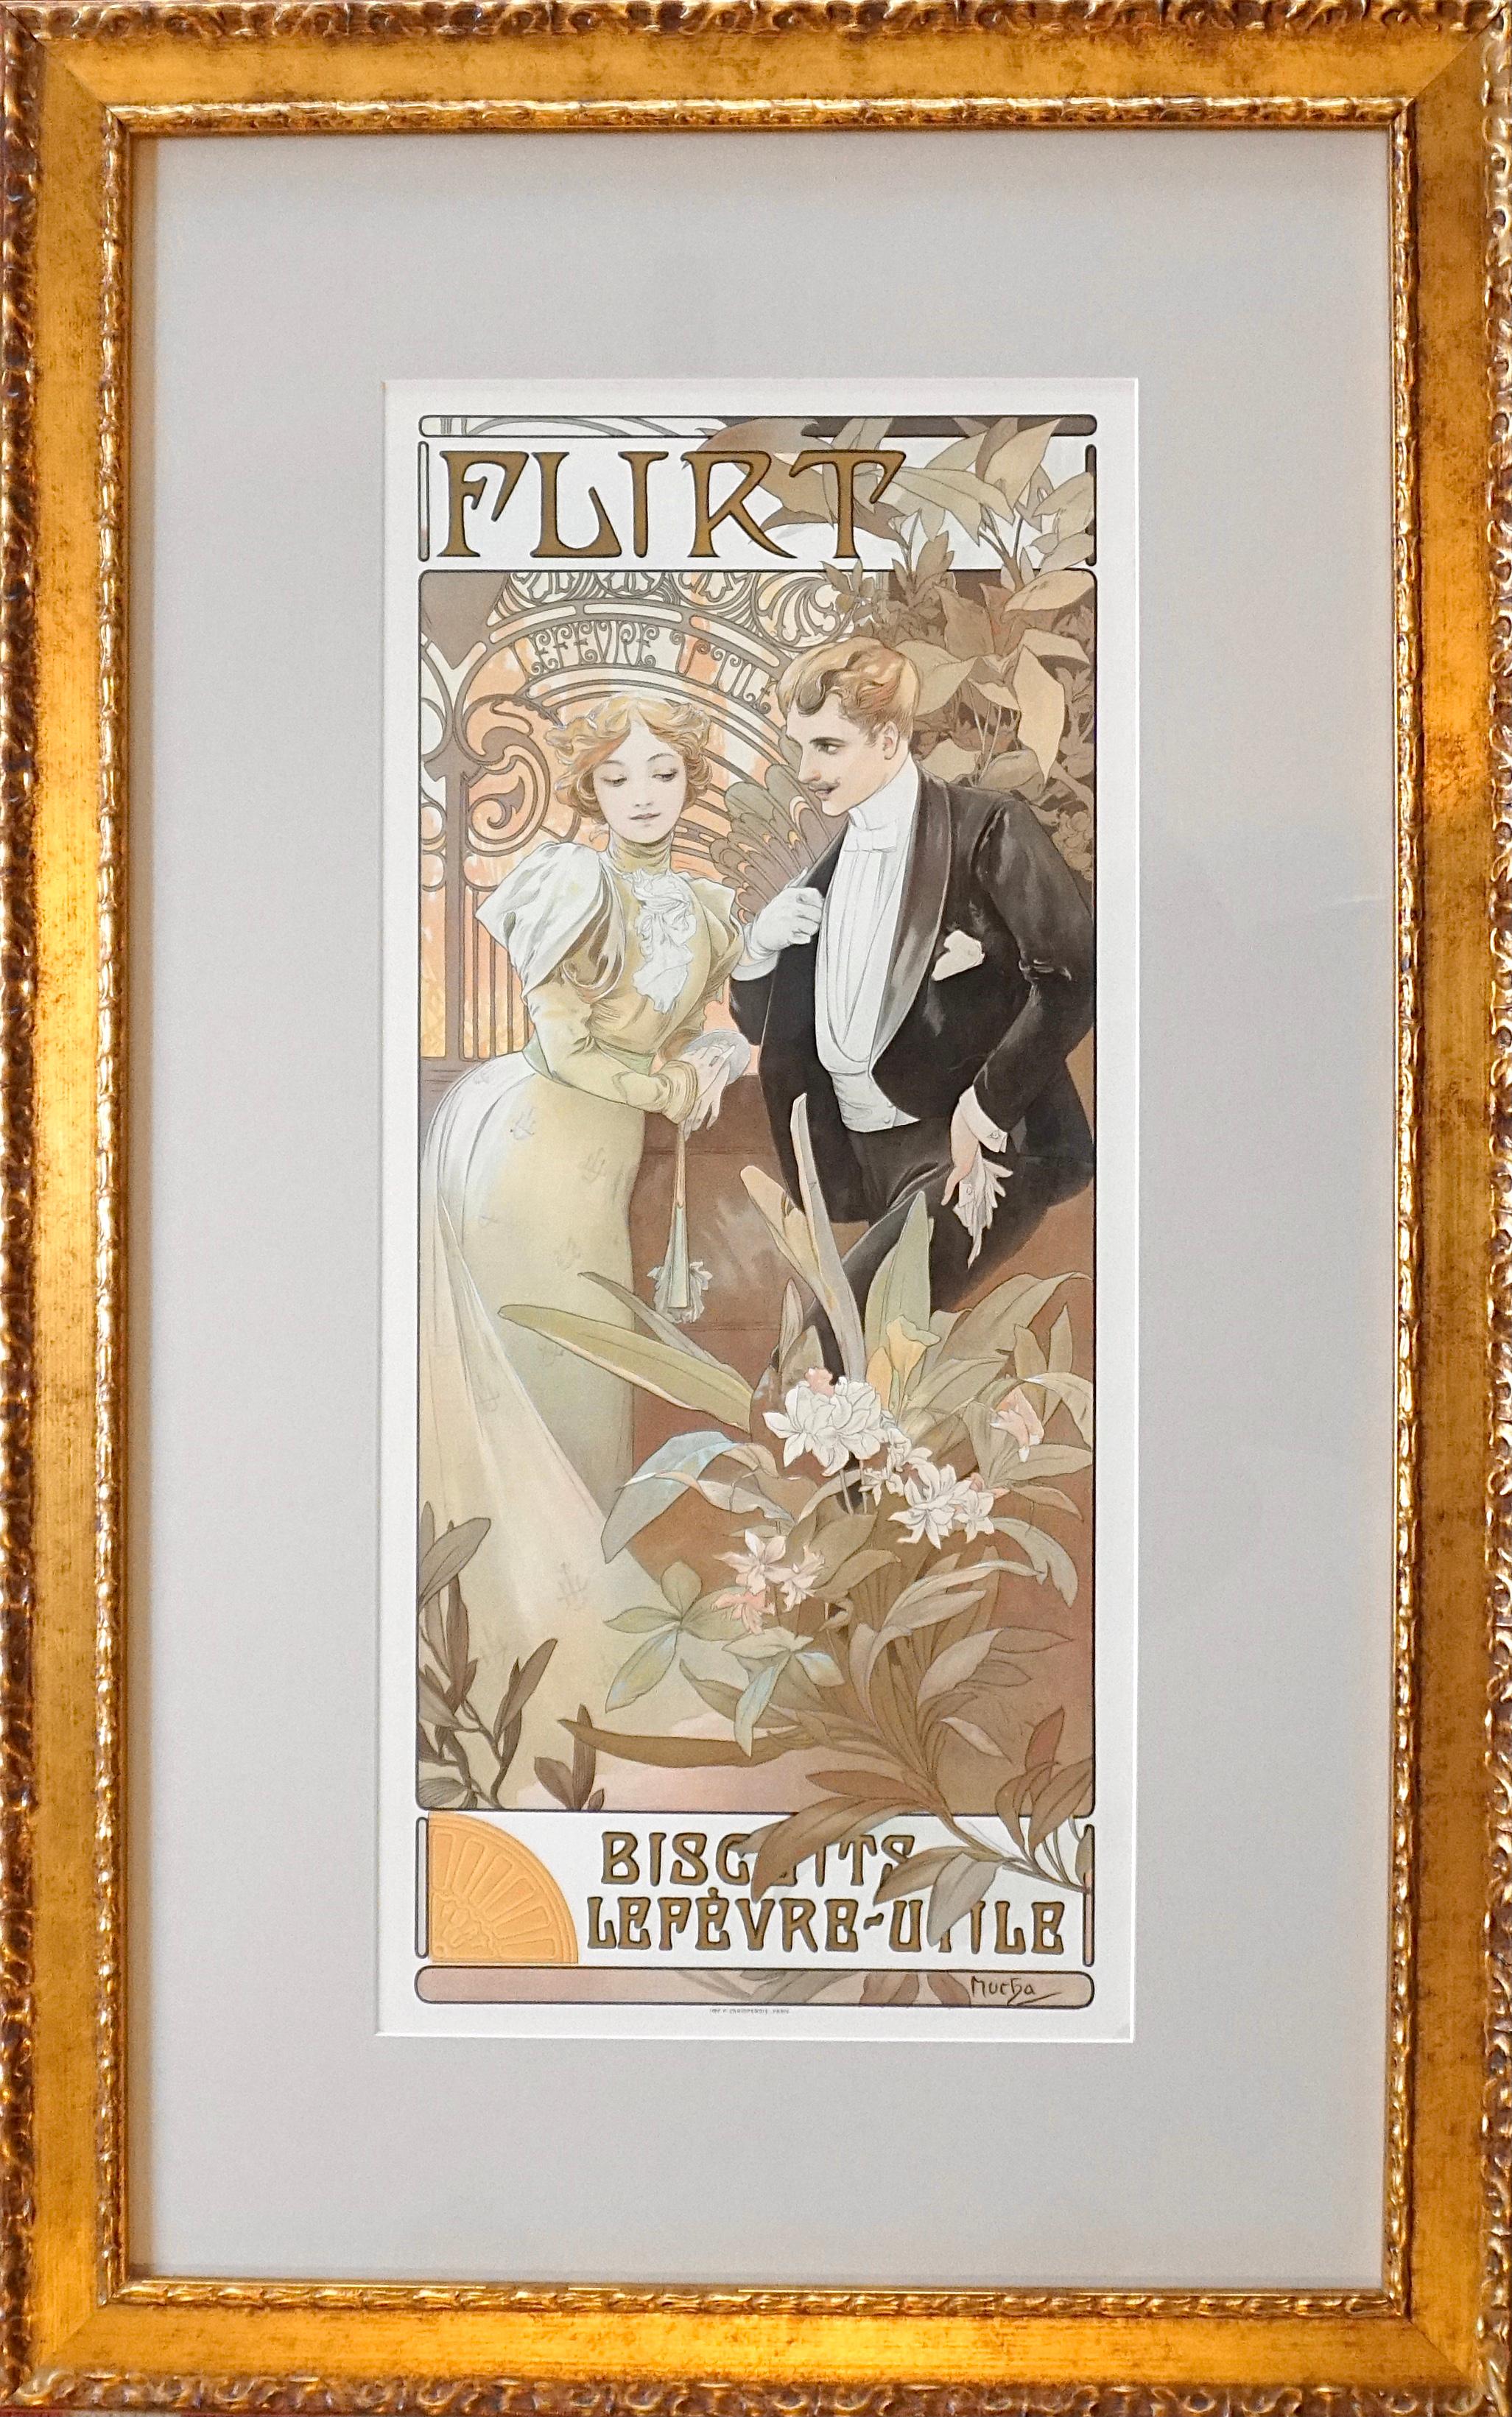 Alphonse Mucha (Czech, 1860-1939) Flirt Biscuits Lefevre Utile.
1899, Lithograph in colors on wove paper. Linen backed.
Imp F. Champenois Paris.
Measures : sheet: 24.75 x 11.75 inches.
frame: 35.75 x 22.5 inches.
Condition: Excellent with tape